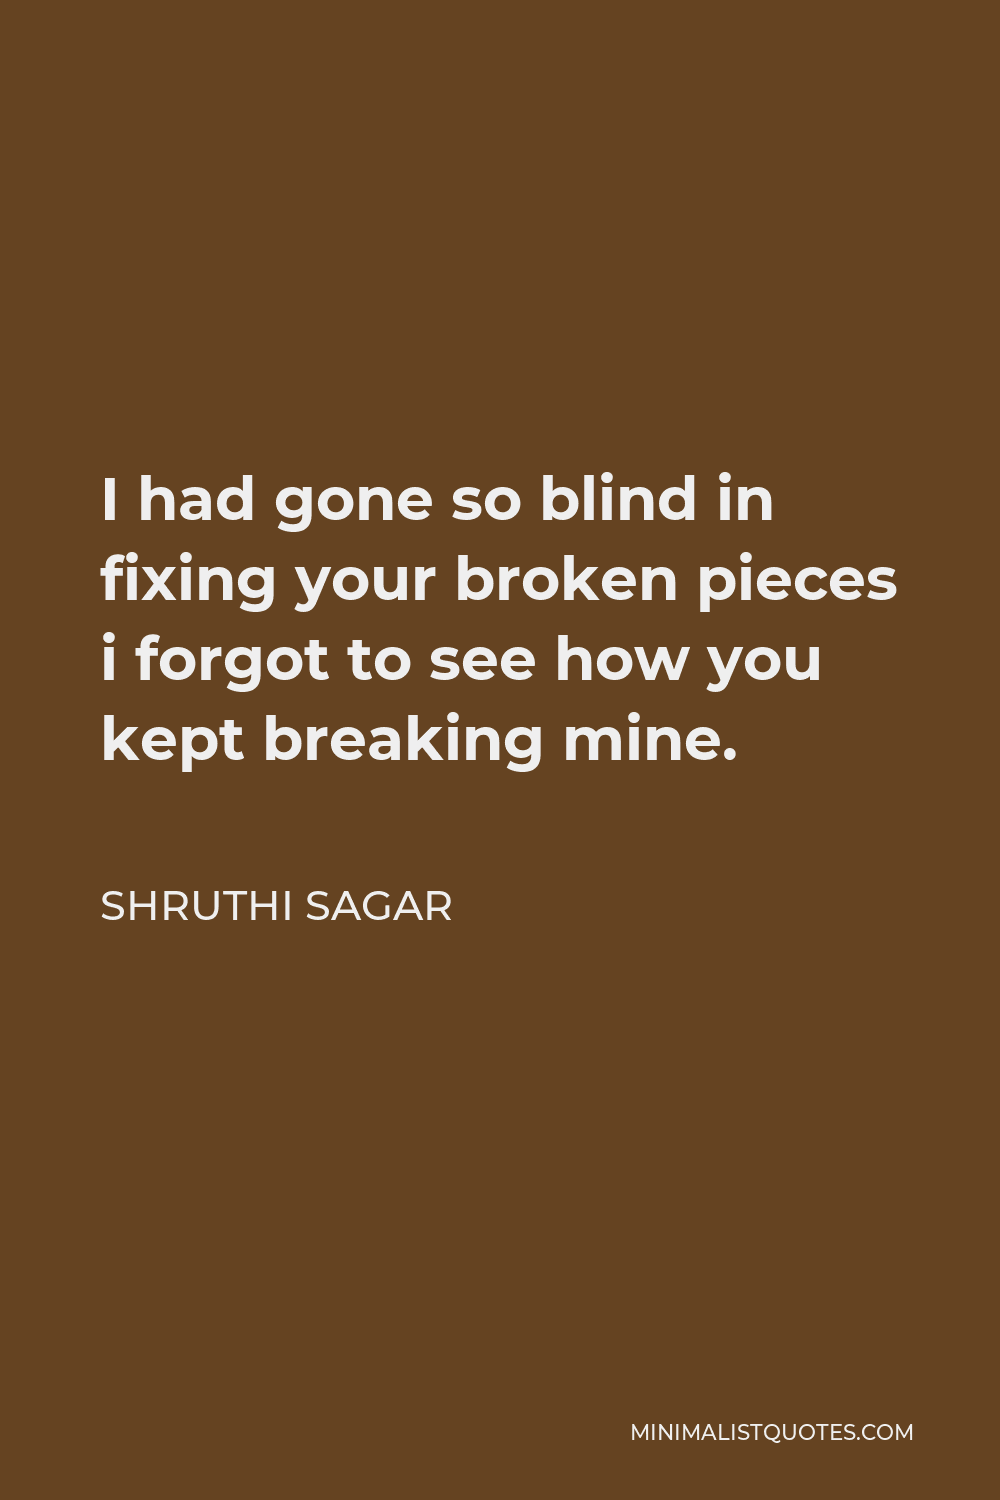 Shruthi Sagar Quote - I had gone so blind in fixing your broken pieces i forgot to see how you kept breaking mine.